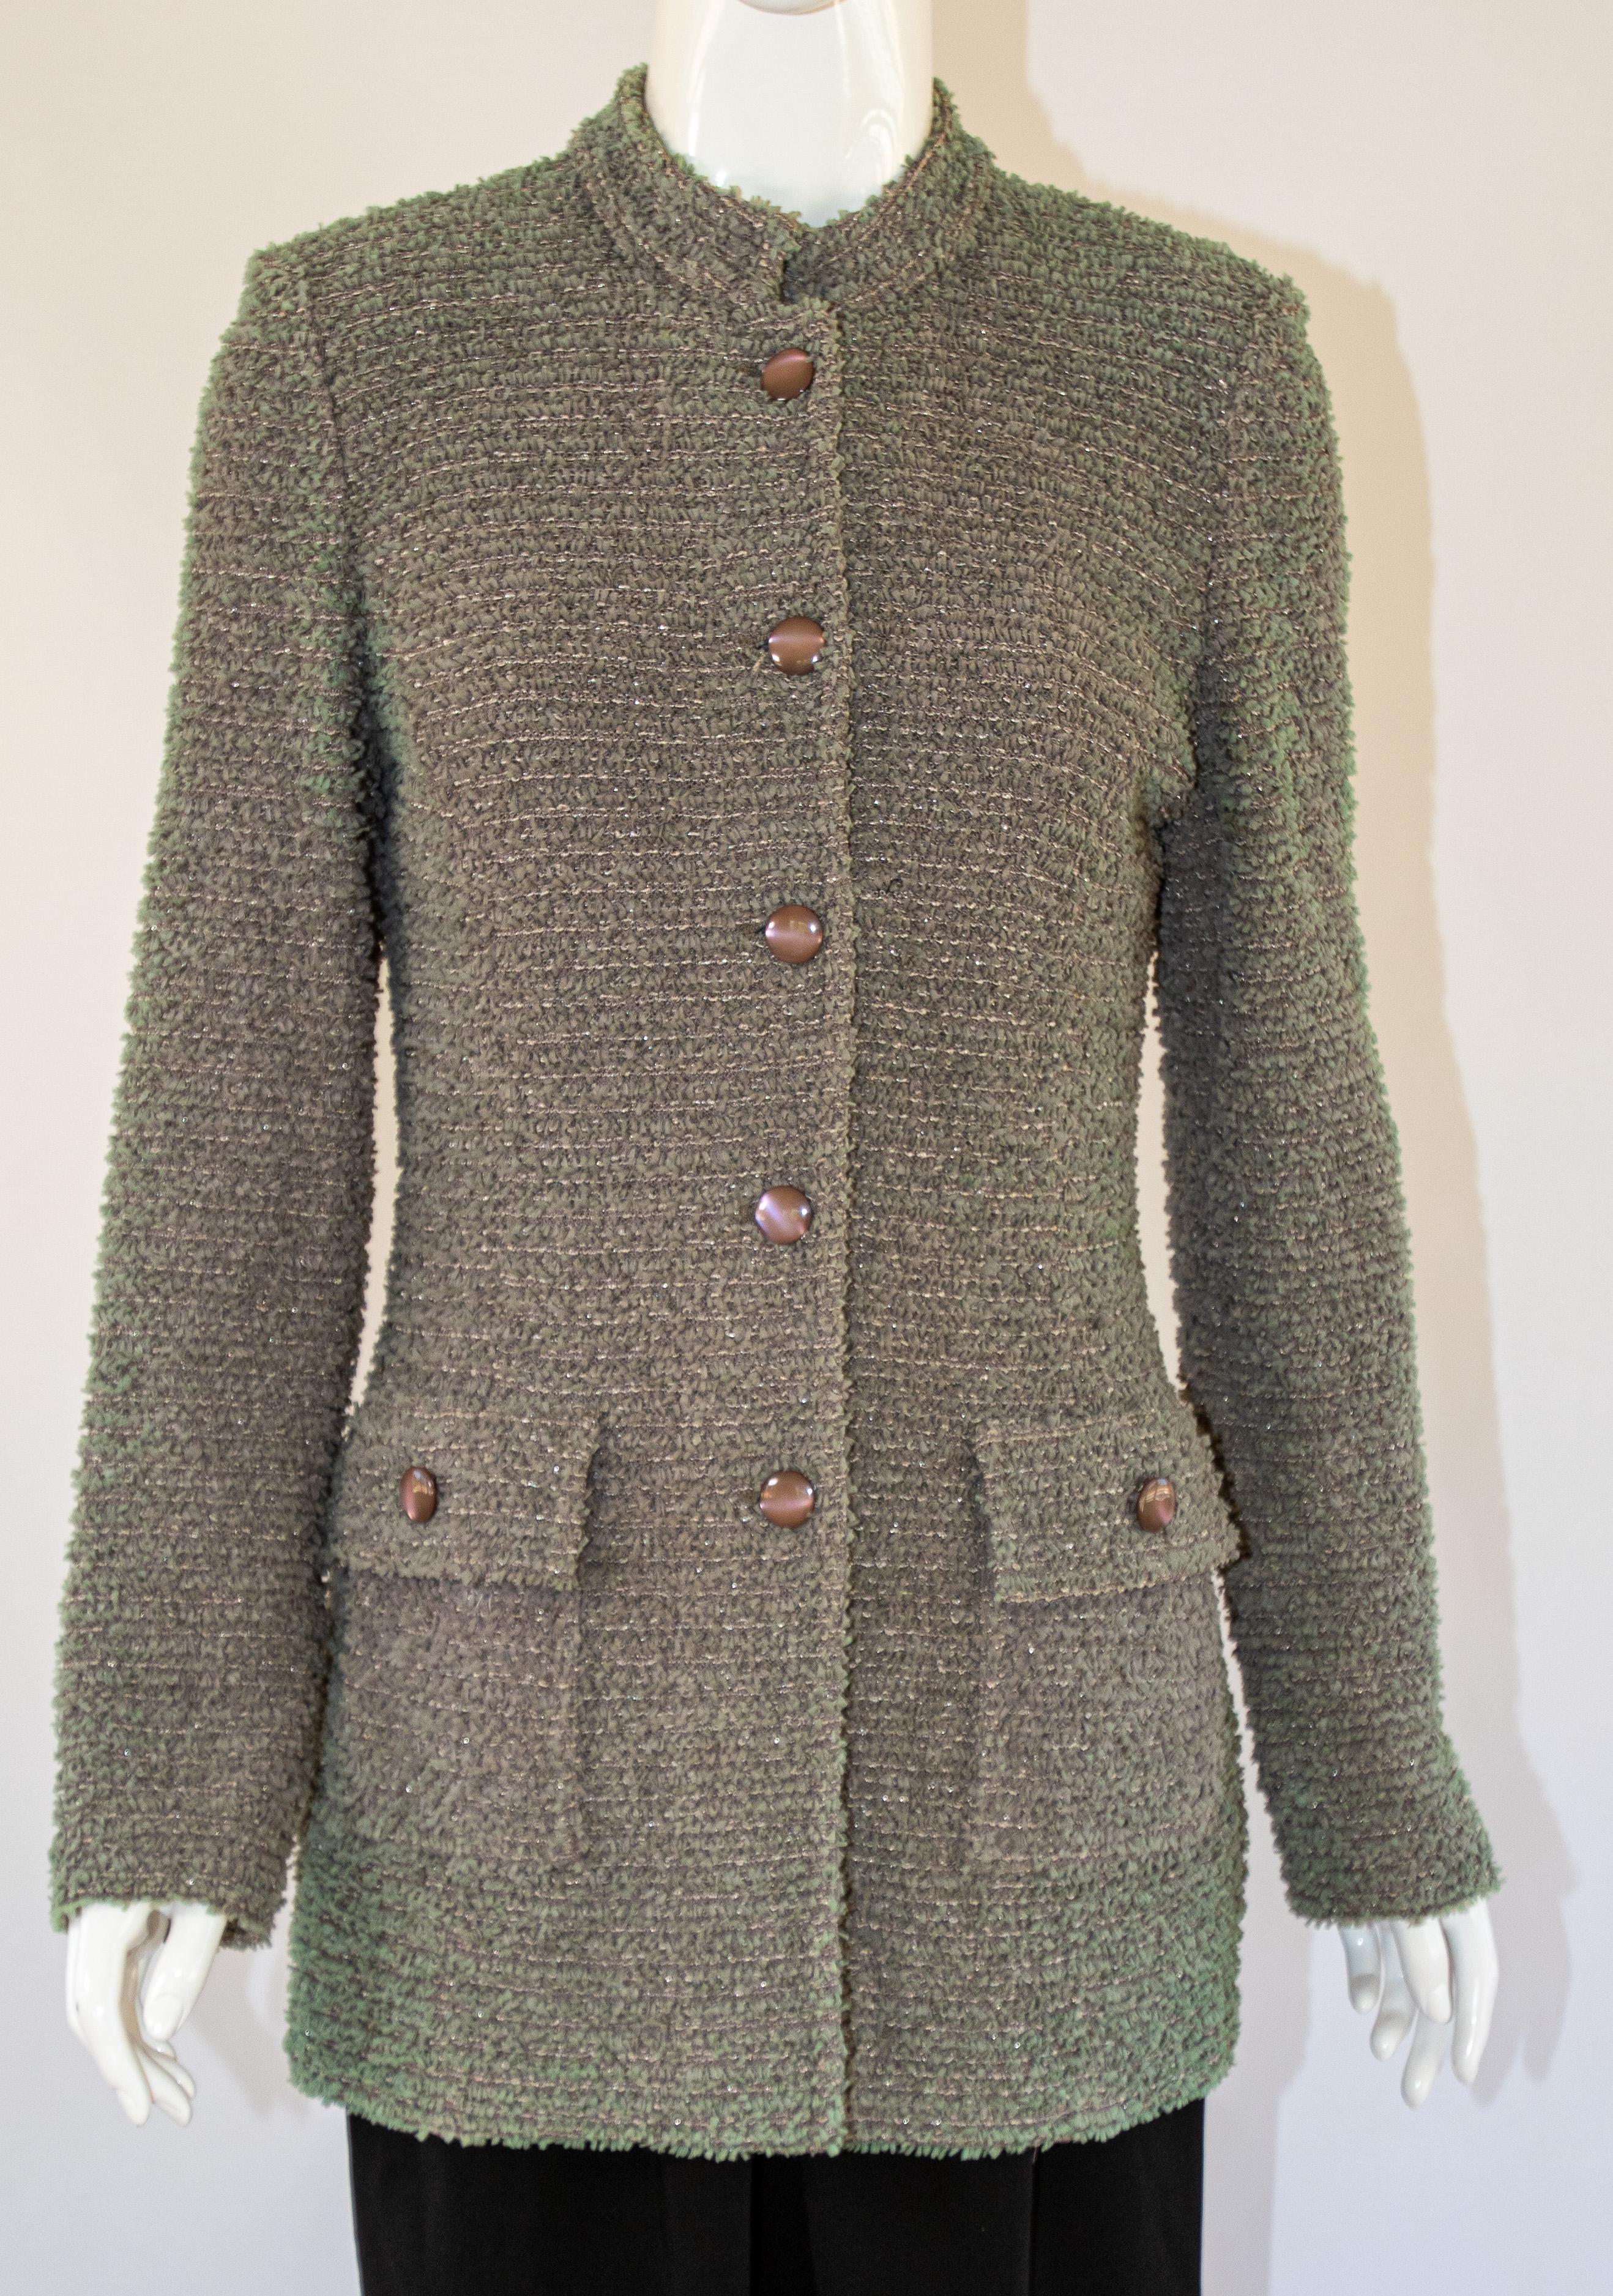 St John Ribbon Eyelash Grey Tweed Long Jacket.
A long jacket is cut from textured fil coupe ribbon eyelash tweed, complete with signature gold buttons and two front patch pockets.
Button front with gold tone hardware
Overall Length: 29 Inches
Sleeve